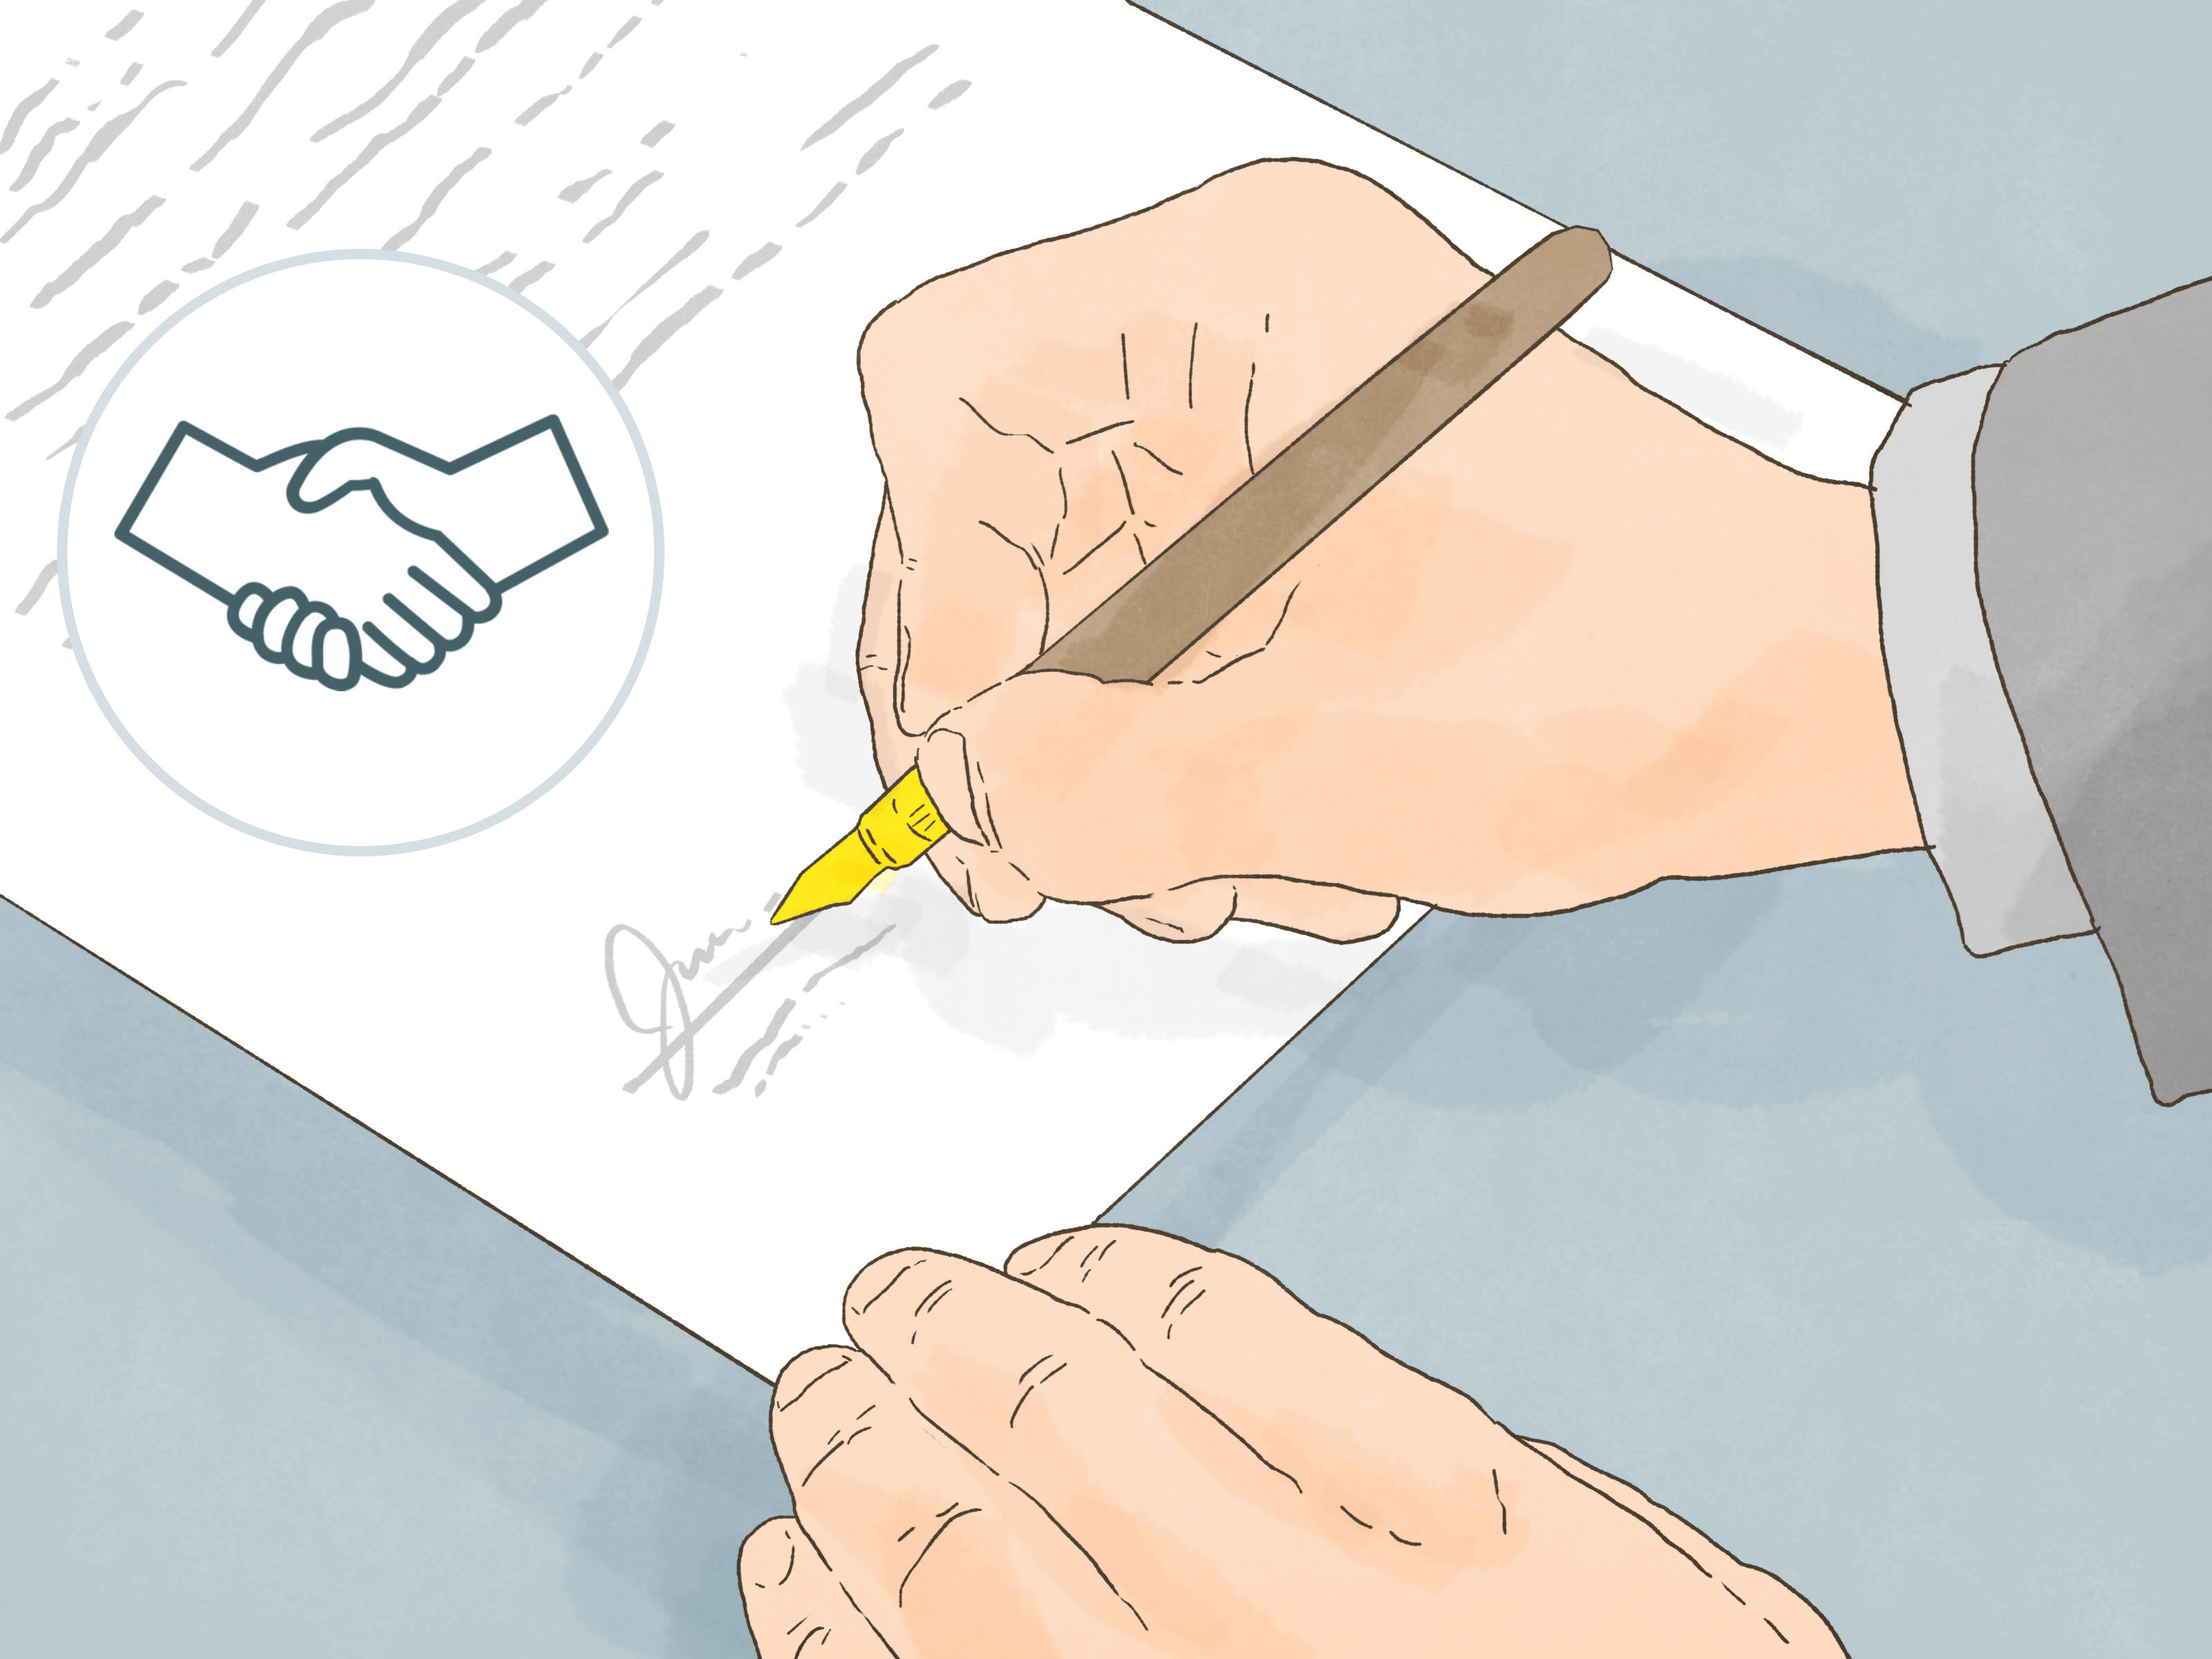 Buy Sell Agreement Llc How To Write A Buy Sell Agreement With Pictures Wikihow